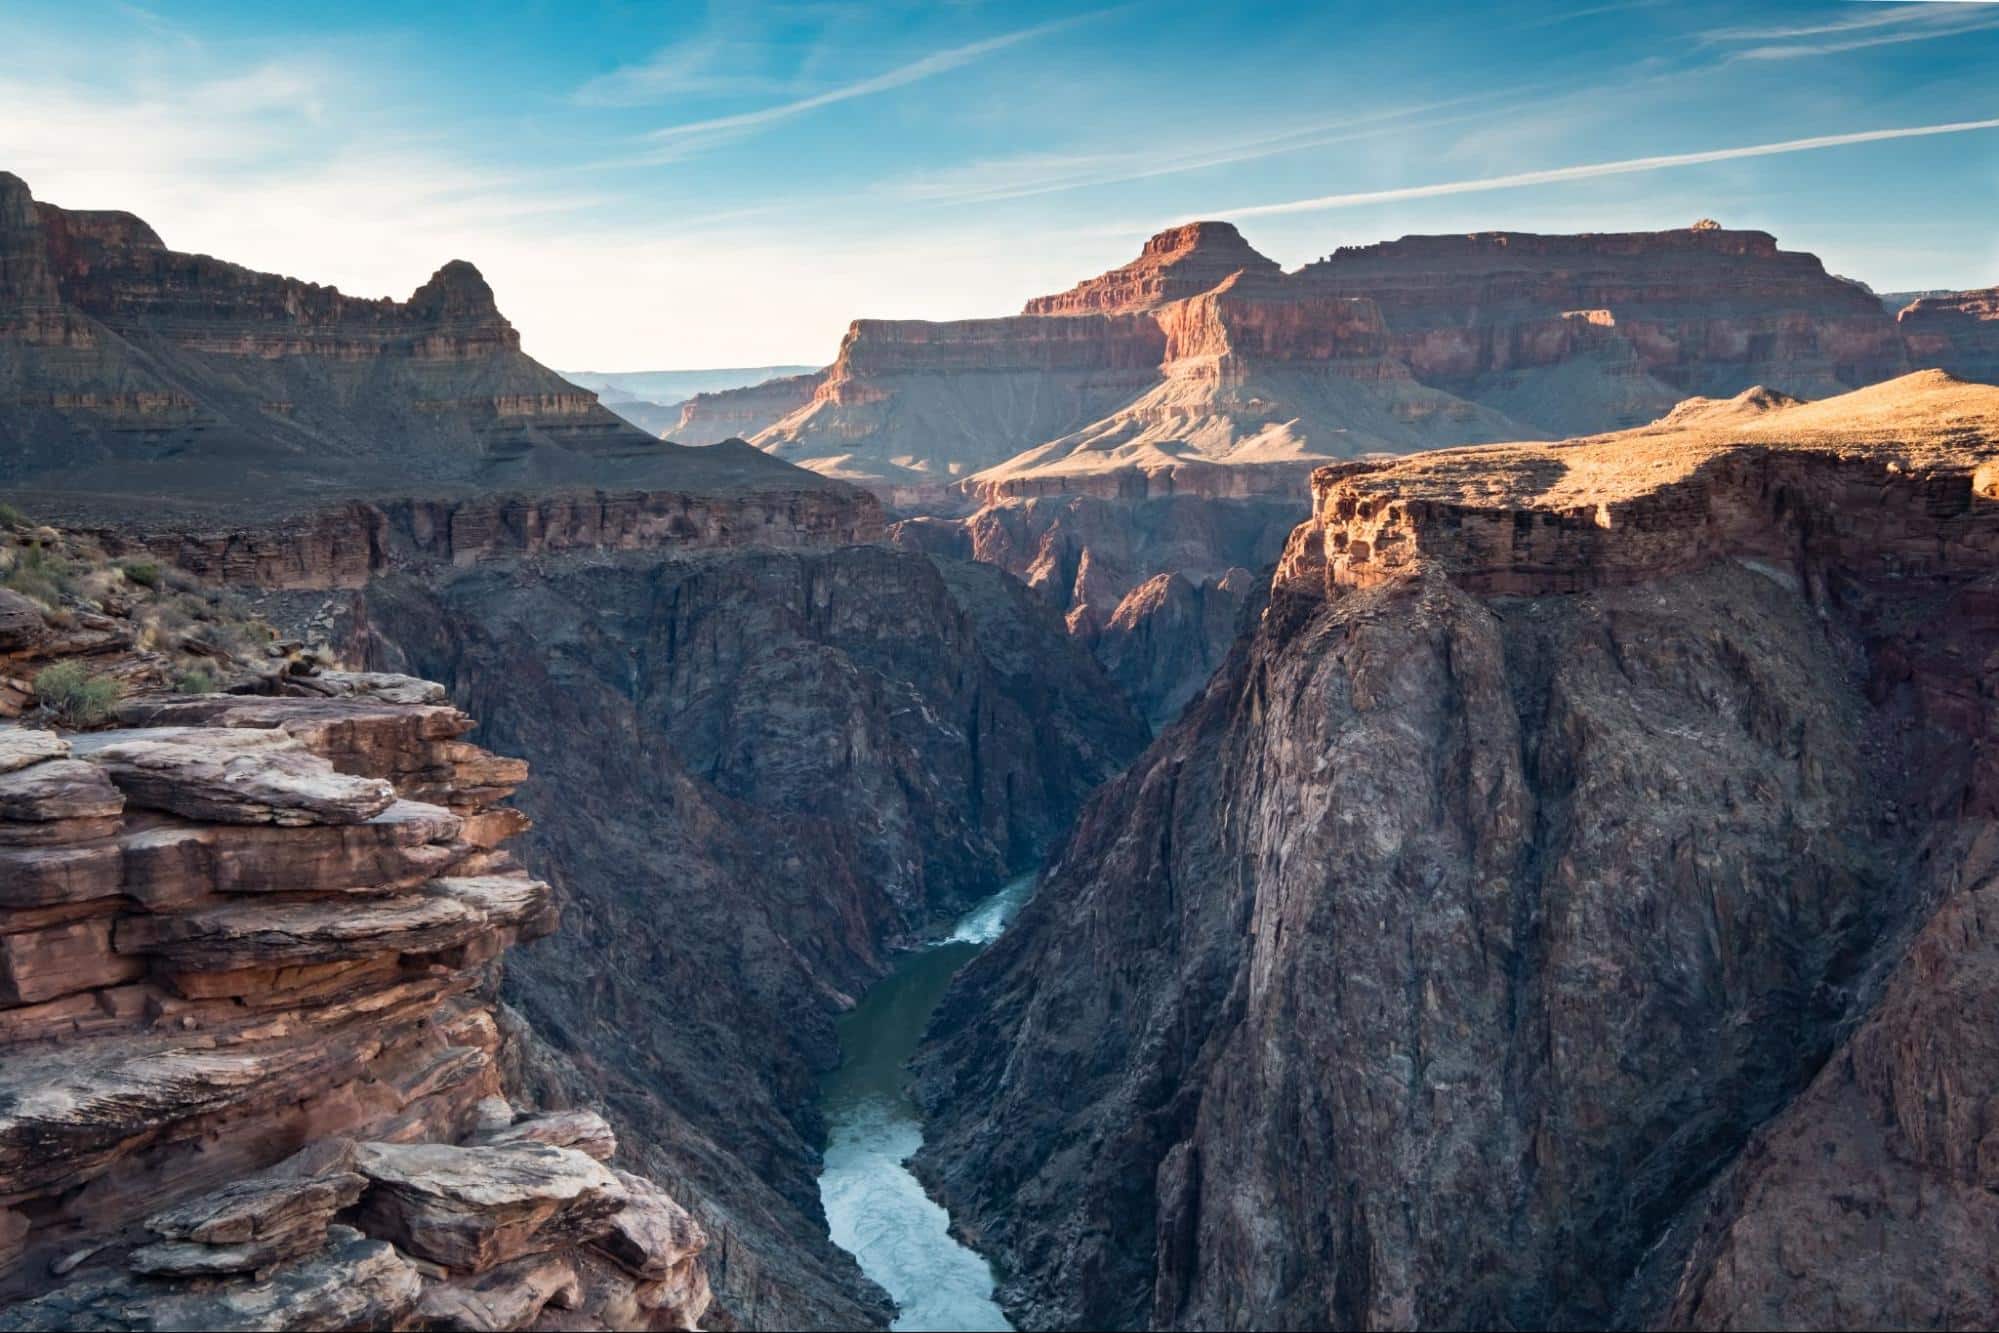 A must-visit for groups, in terms of group destinations a trip from Vegas to the Grand Canyon shouldn't be missed